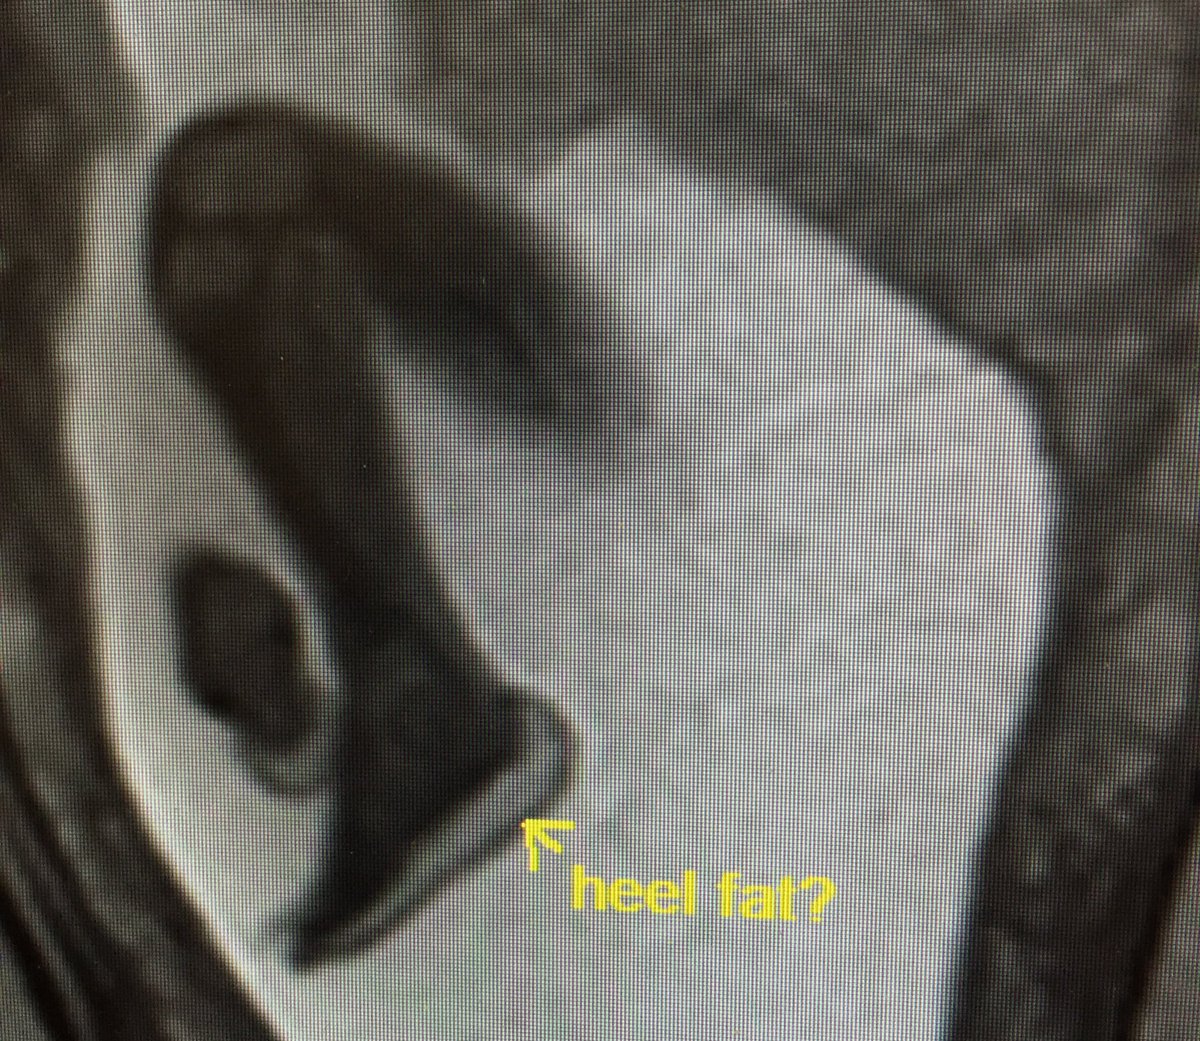 On the next (and so far, only) segment of #WhyIChose #PediatricRadiology: Day 3 on Fetal Imaging and I’ve discovered heel fat 🦶🏻 #fetal #radiology #imaging #MedEd #nothydrops #preThanksgivingvibes #HumpDayVibes #education #fetalMRI #MRI #FetalImaging #prenatal #OB #obstetrics